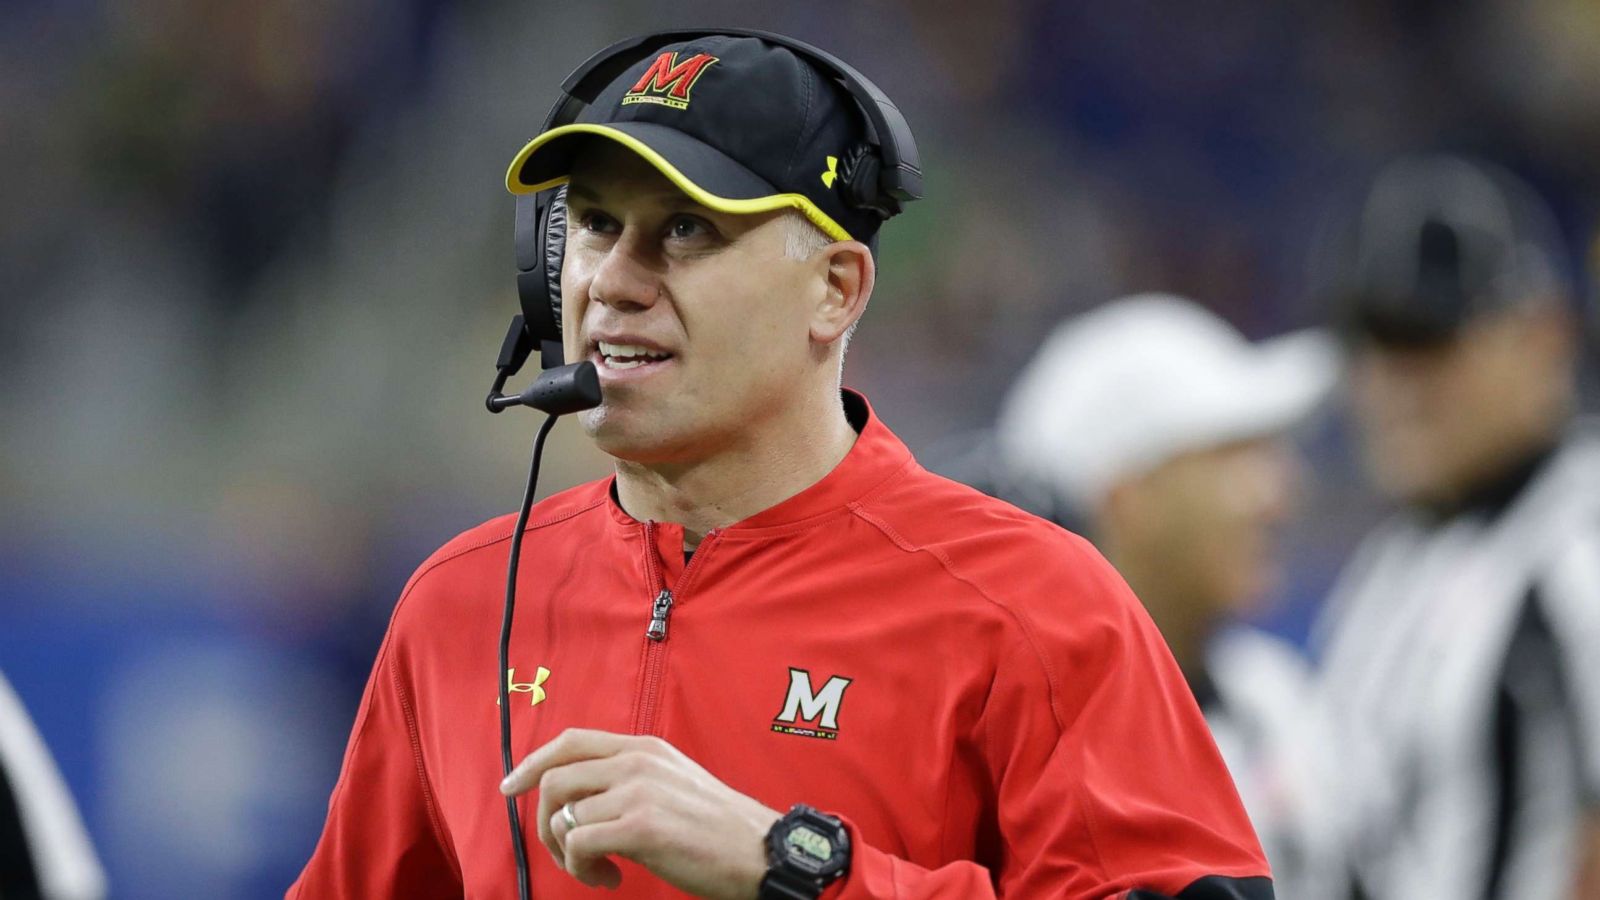 University of Maryland fires football coach after backlash from students,  parents - ABC News